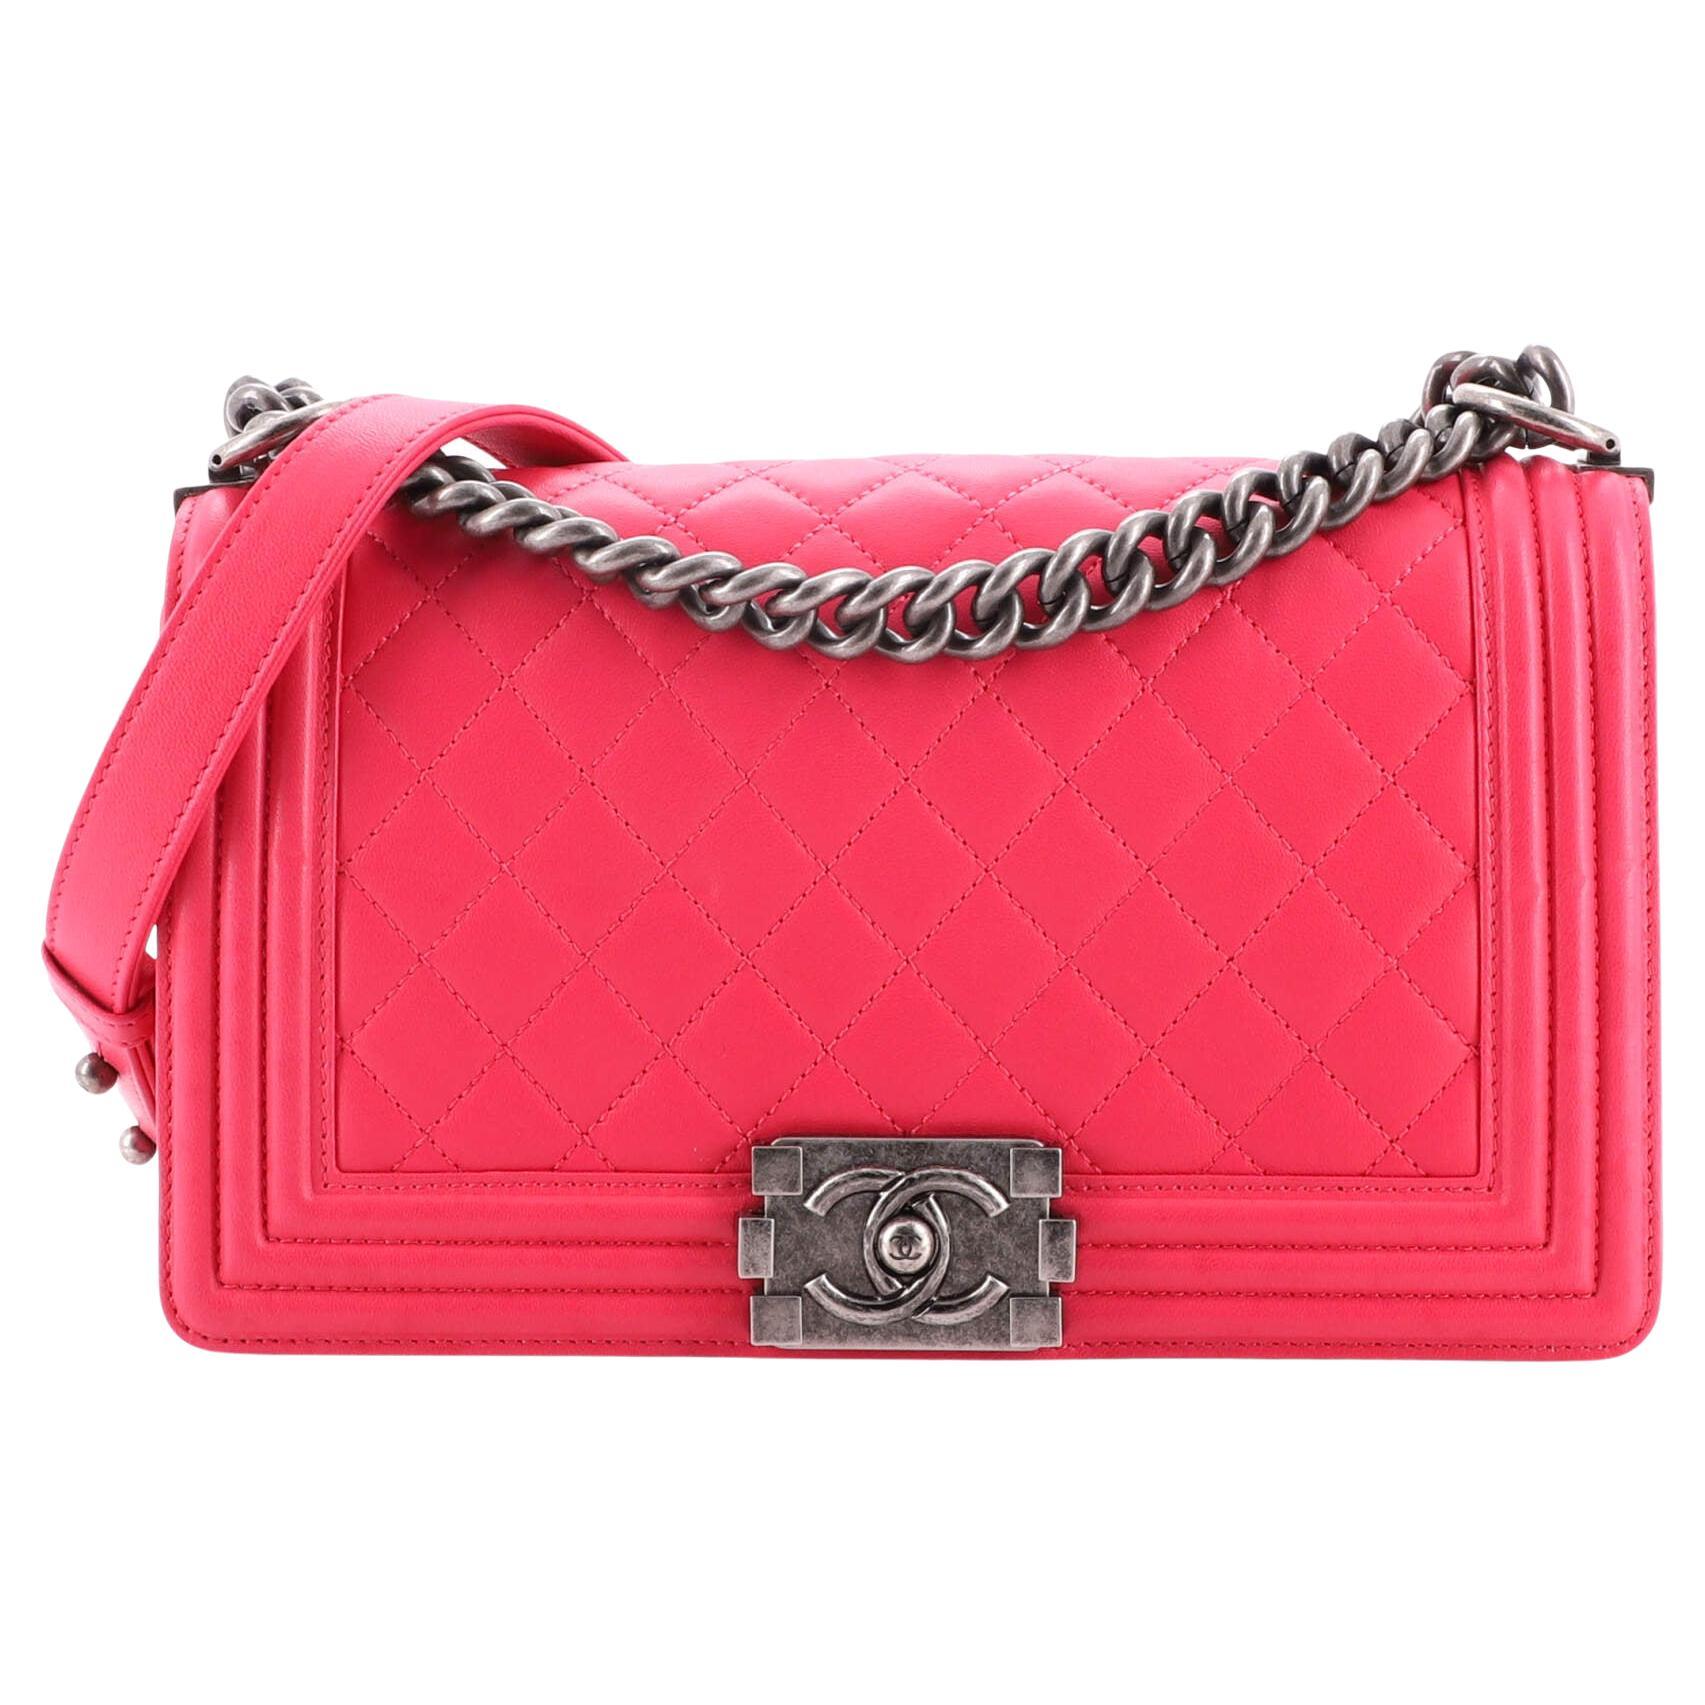 Chanel Woven Flap Bag - 138 For Sale on 1stDibs